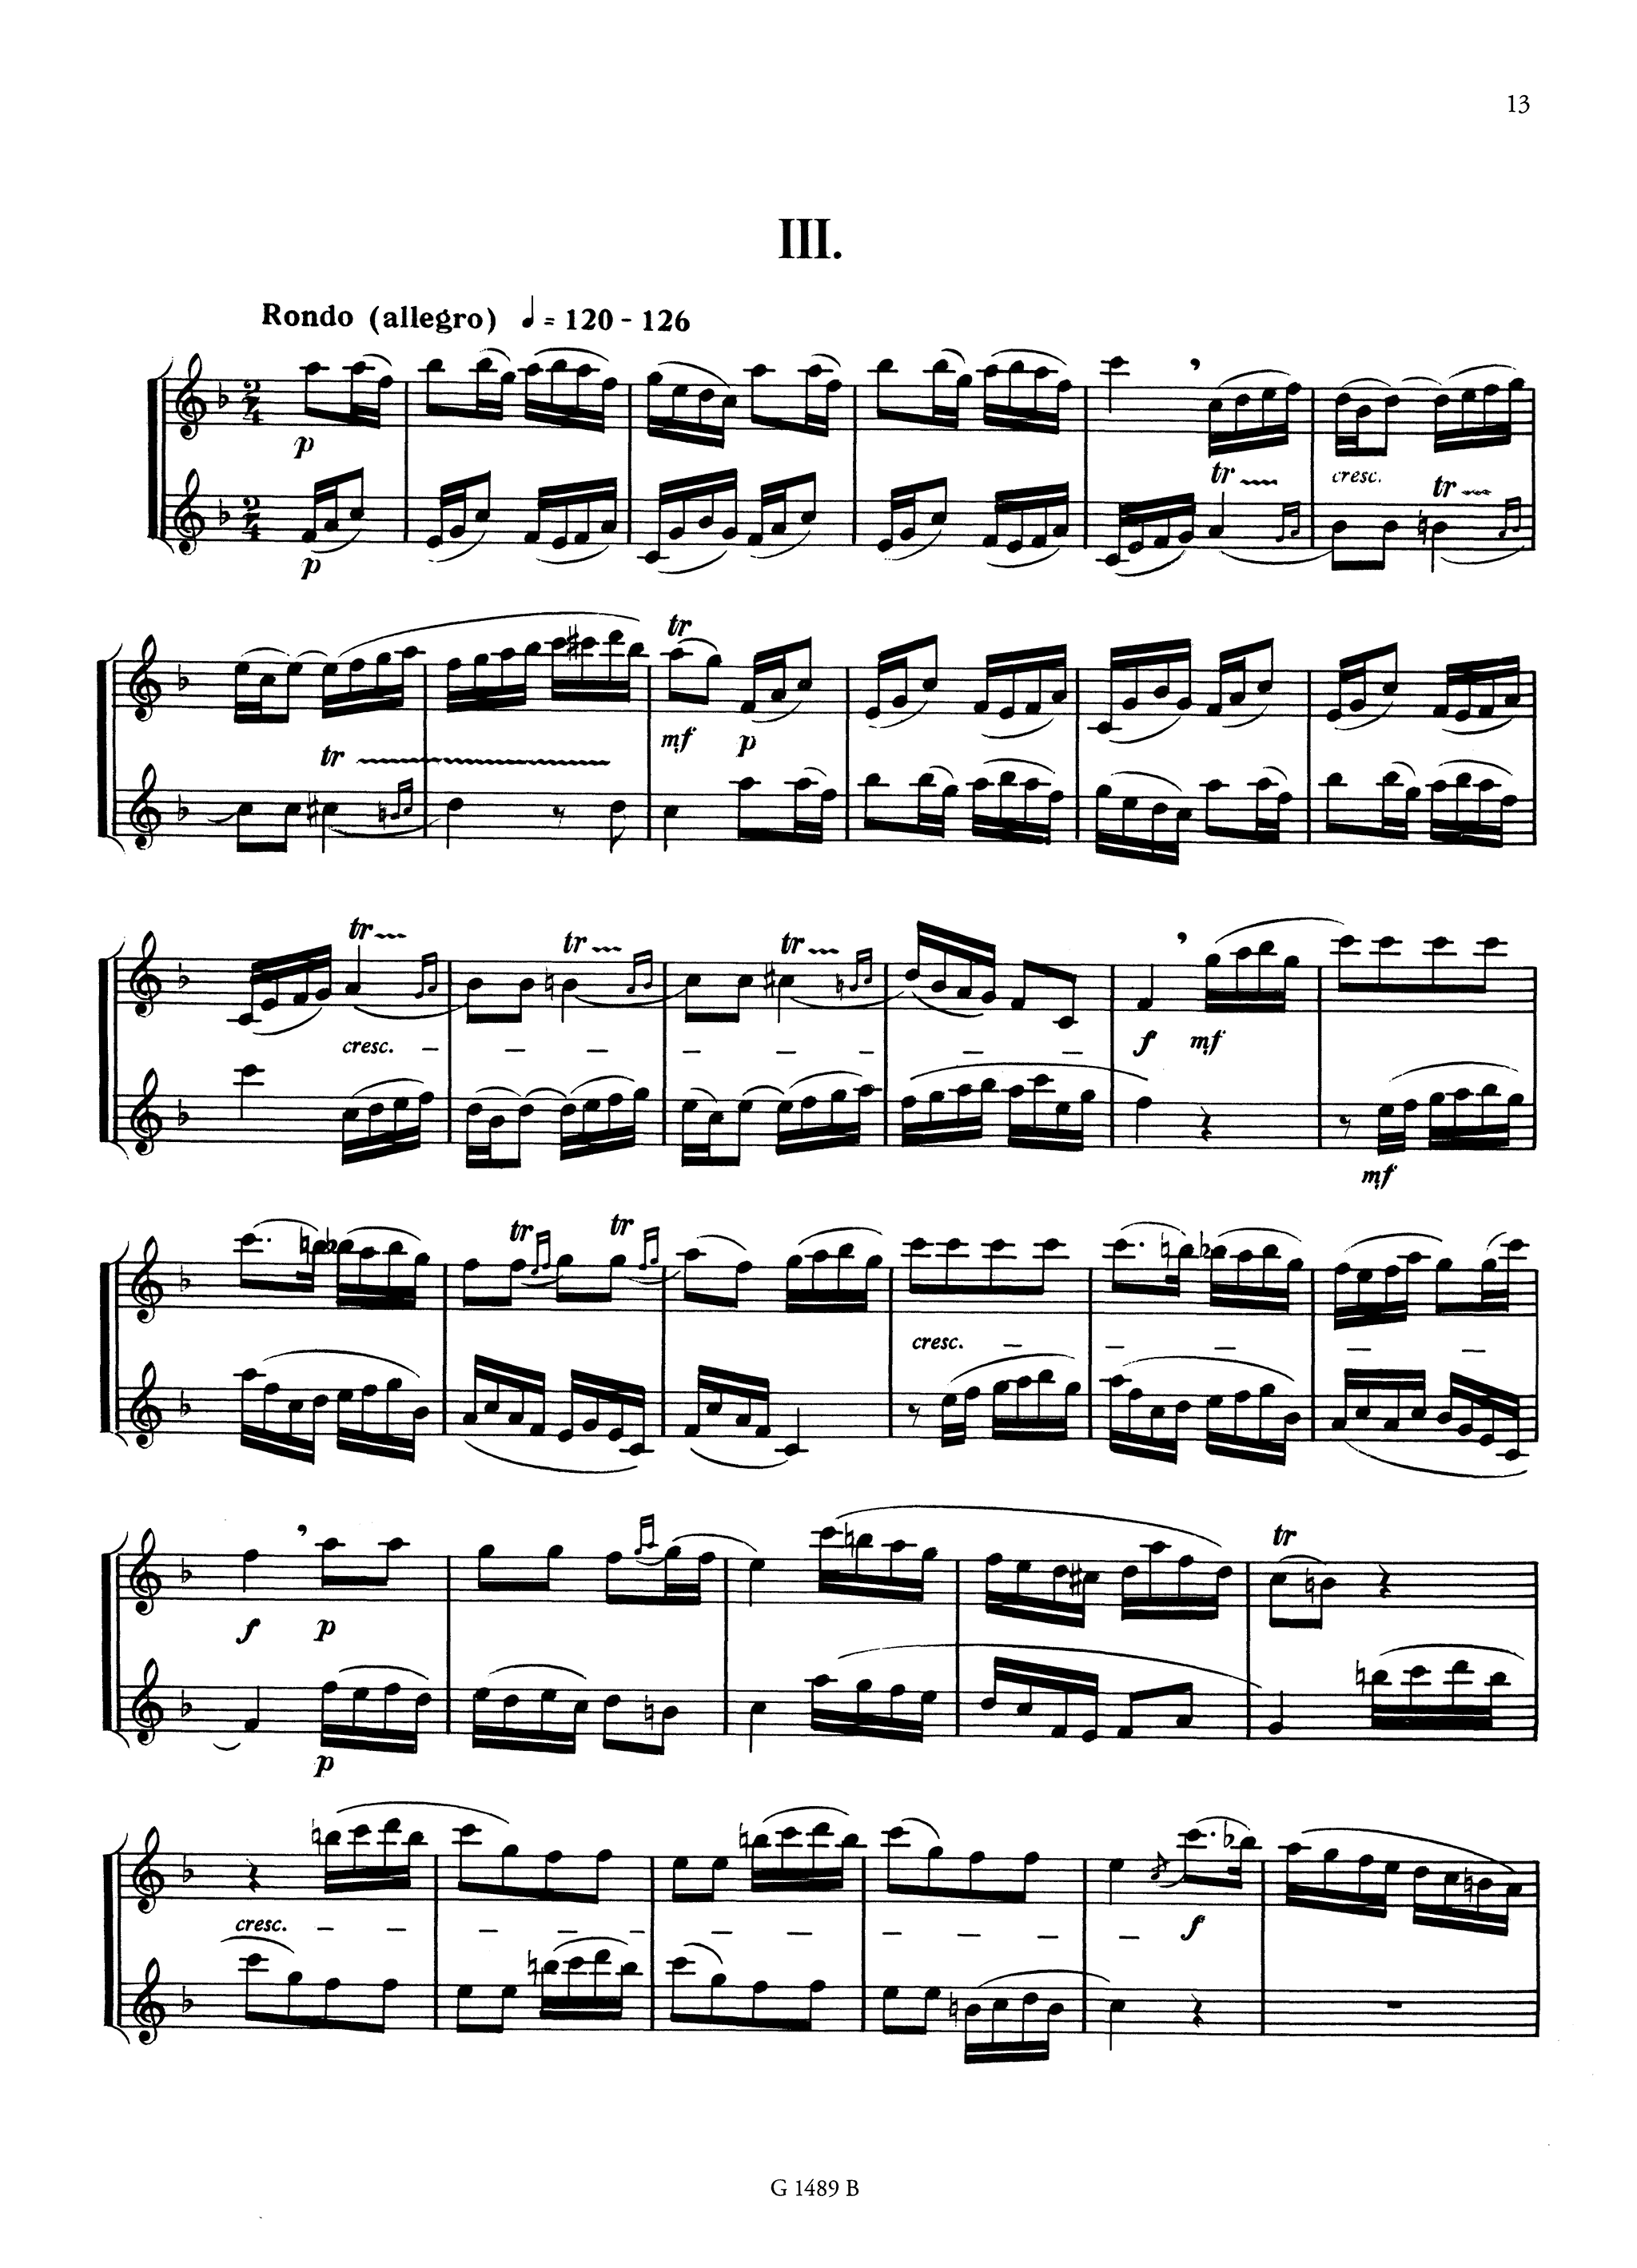 Gebauer Classical Sonata No. 1 arranged by Cahuzac for clarinet duet - Movement 3